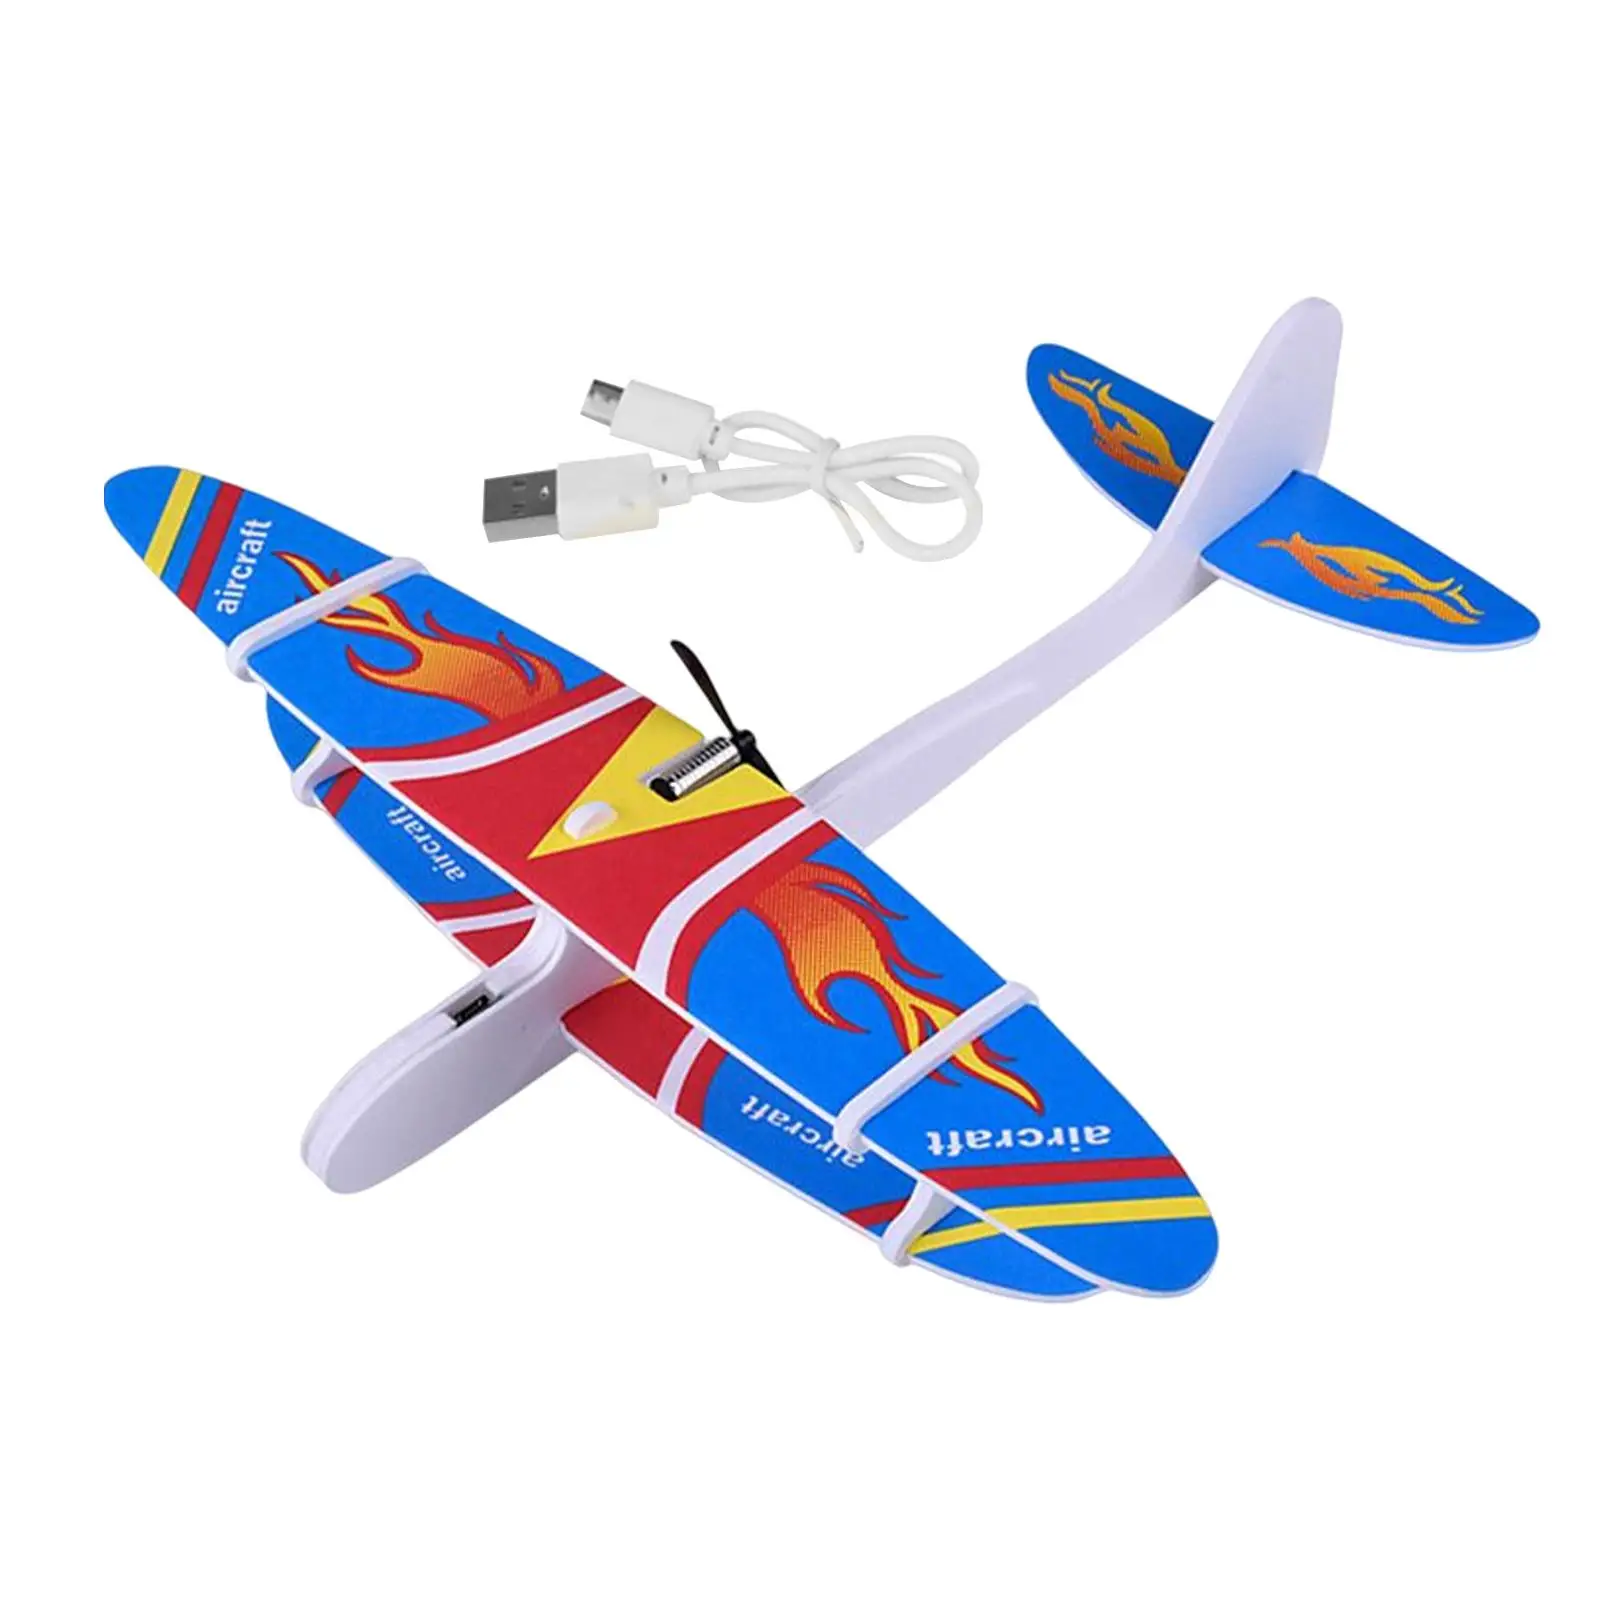 foam Electric Hand Throwing Glider Plane Outdoor Sport game toy for Adults